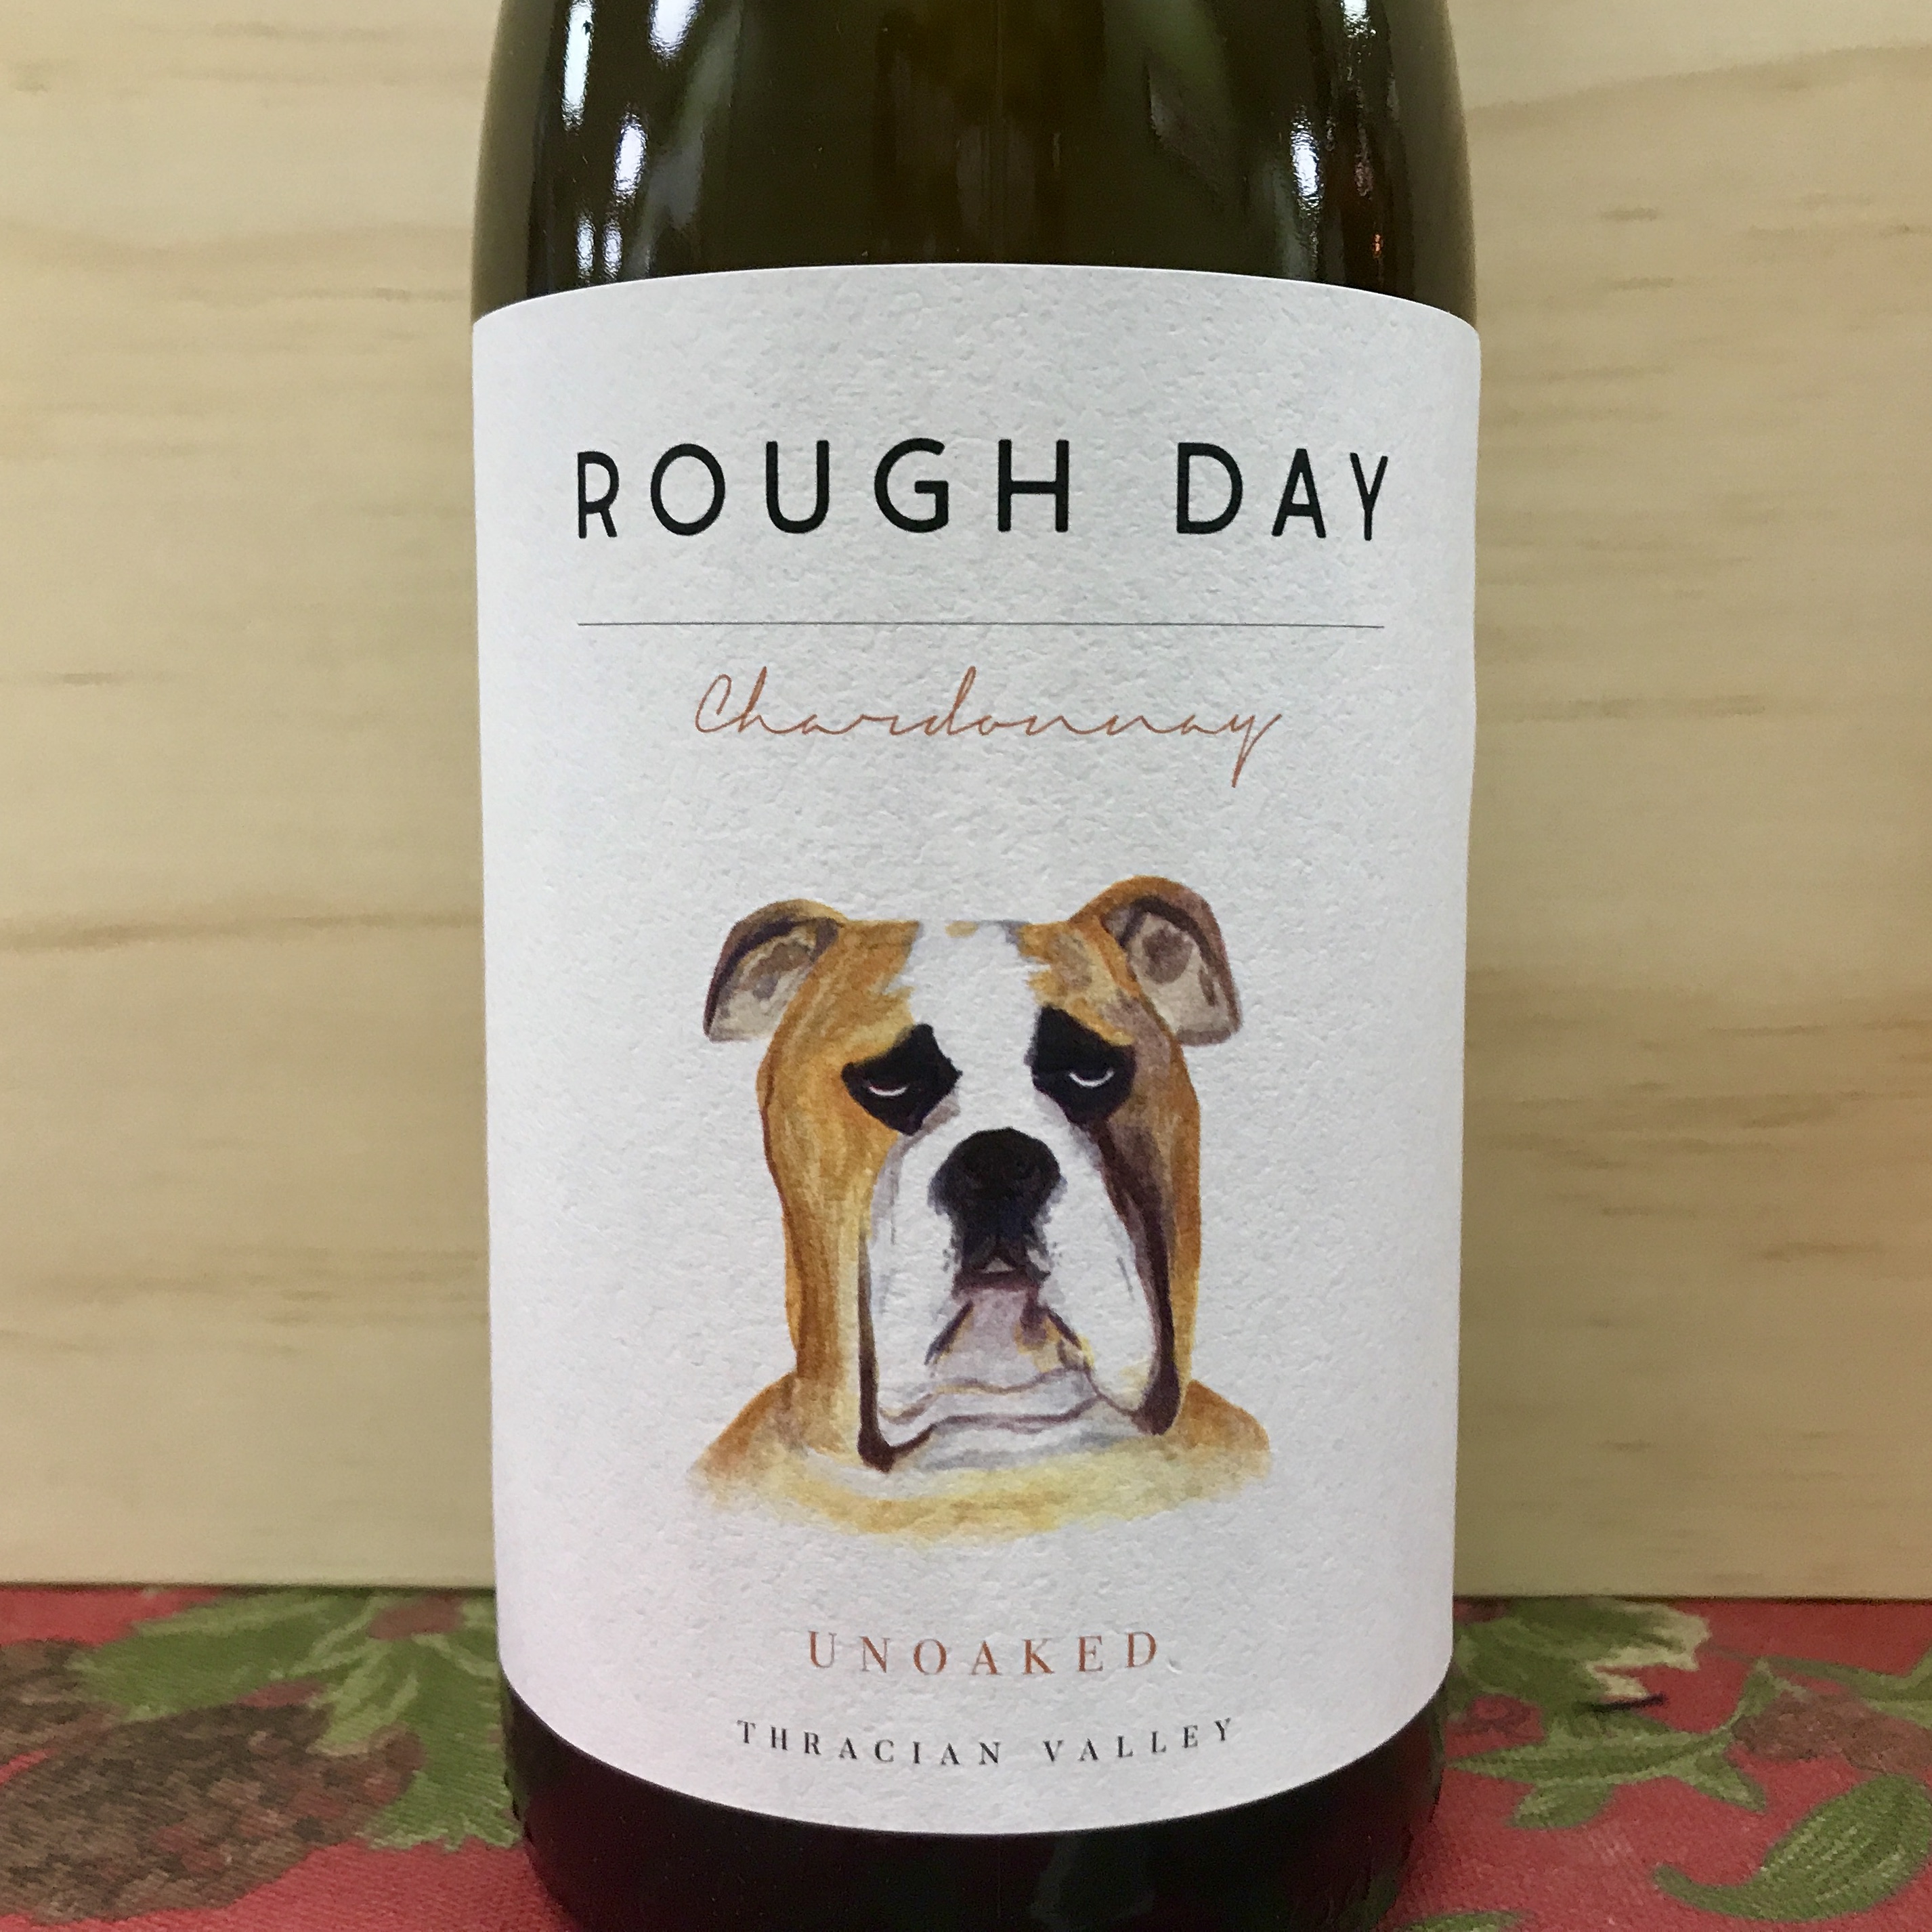 Rough Day Unoaked Chardonnay 2019